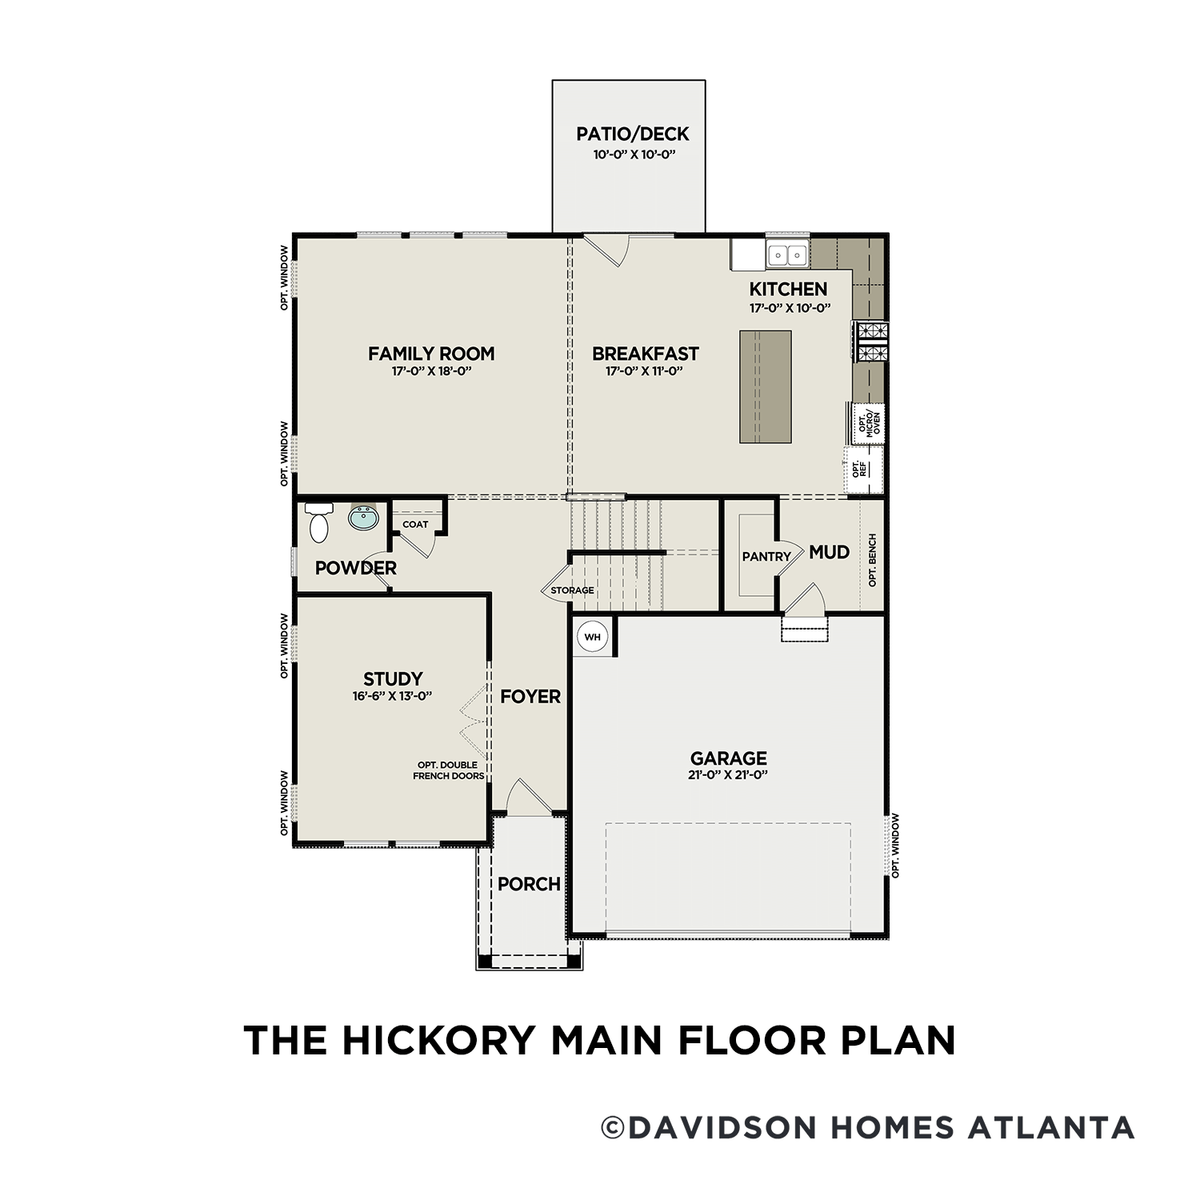 1 - The Hickory A floor plan layout for 88 Van Winkle Street  in Davidson Homes' Wellers Knoll community.